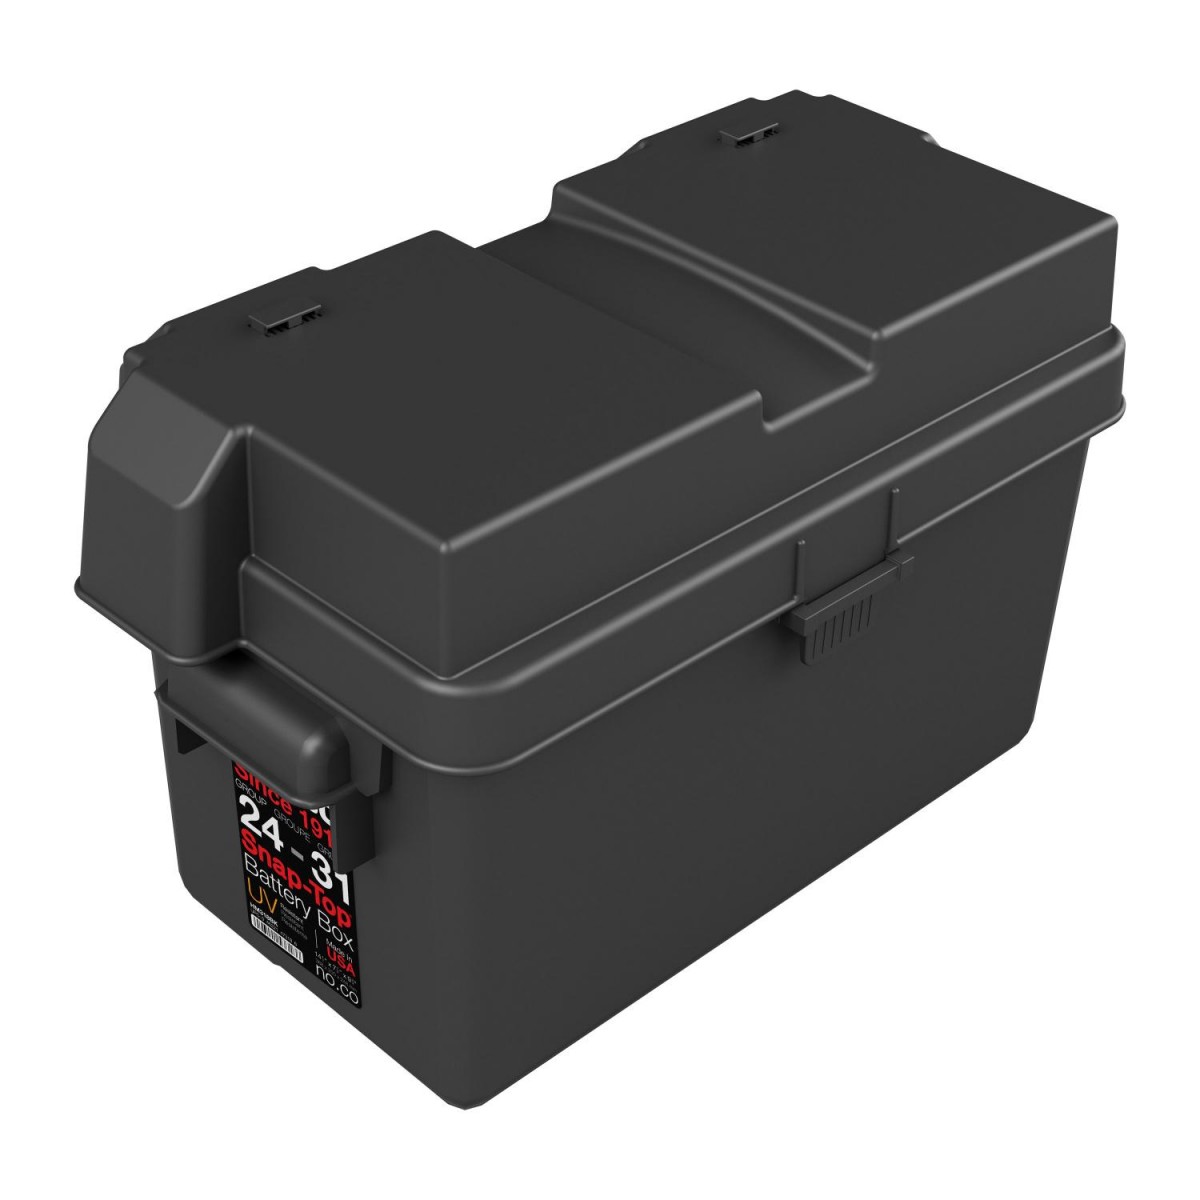 NOCO Snap-Top HM318BKS Battery Box, Group 24-31 12V Outdoor Waterproof  Battery Box for Marine, Automotive, RV, Boat, Camper and Travel Trailer